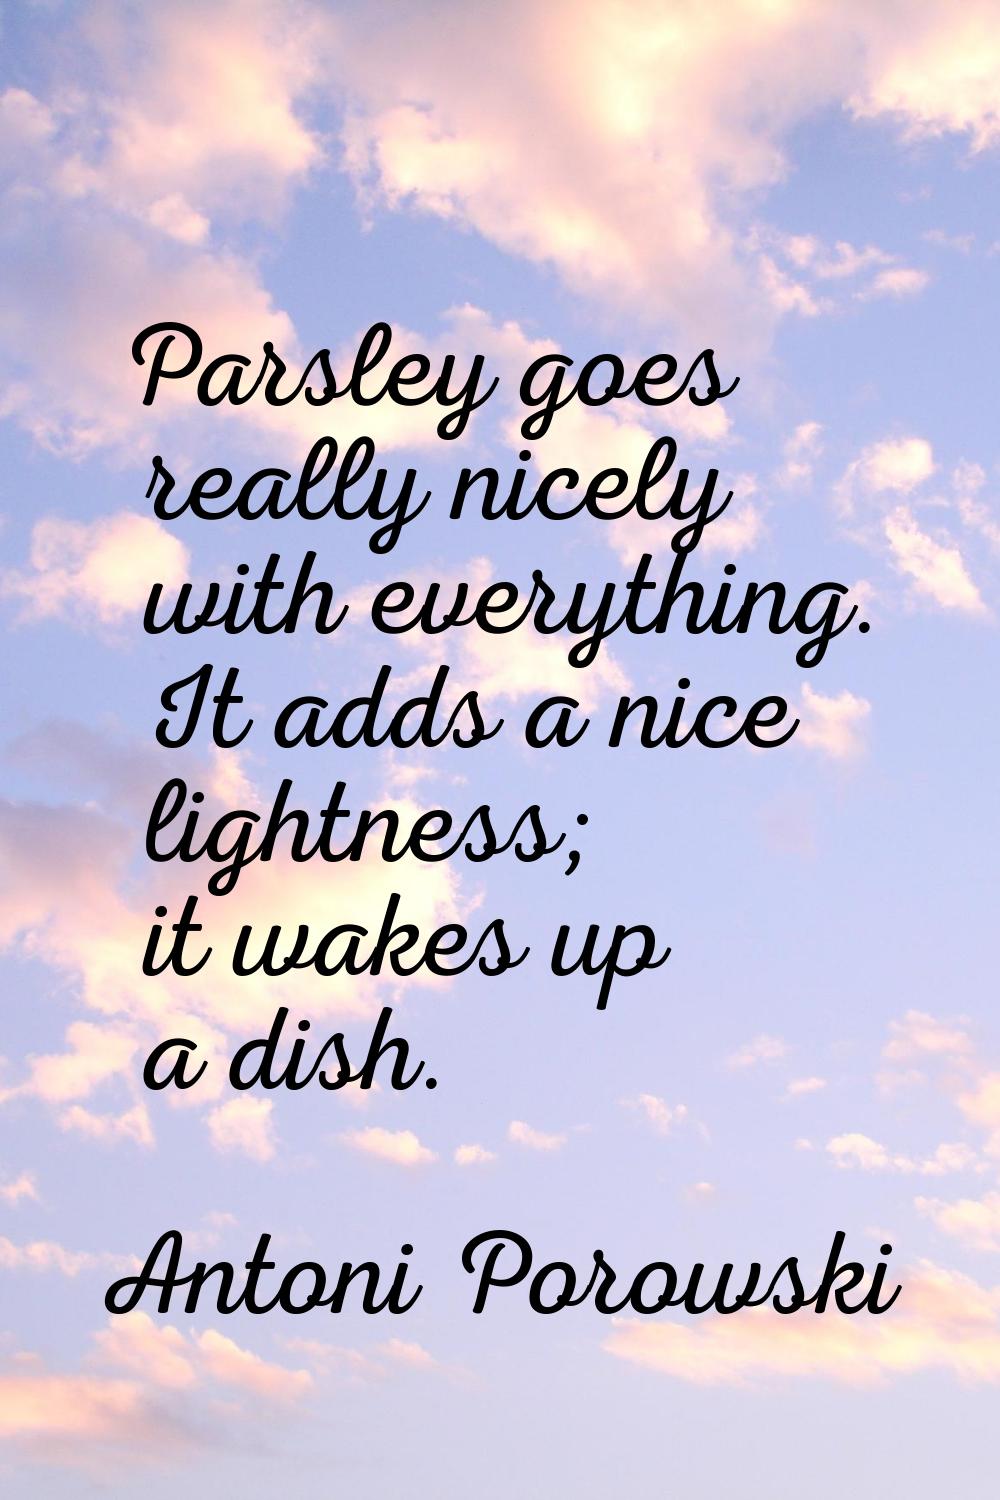 Parsley goes really nicely with everything. It adds a nice lightness; it wakes up a dish.